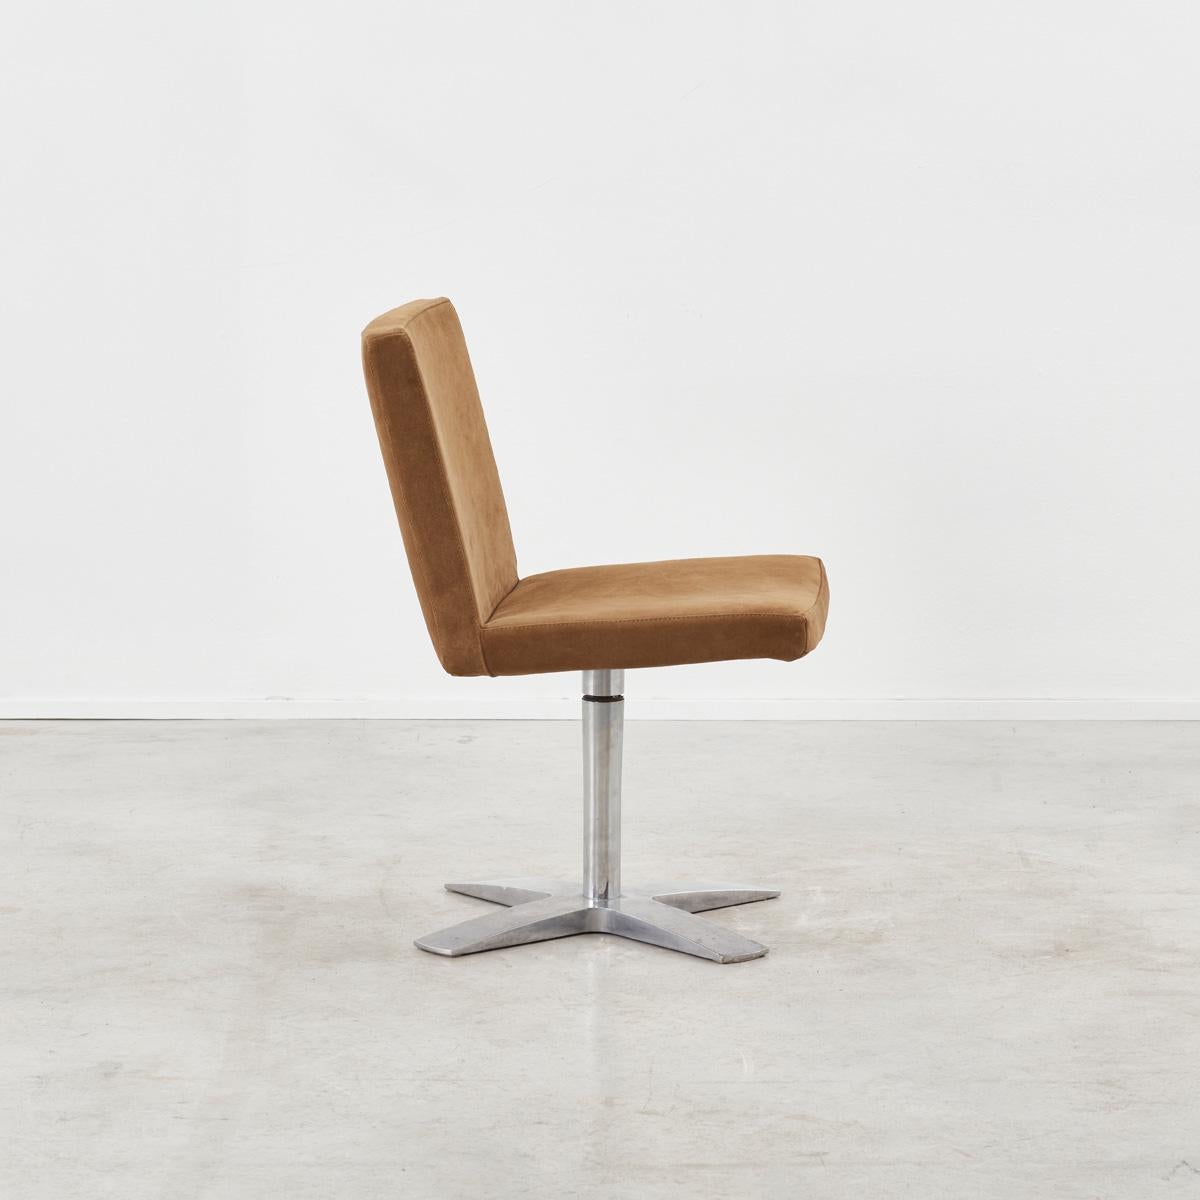 Harri Korhonen, a Finnish designer and the founder of Inno. Korhonens designs feature heavily in Inno’s collection as the lead designer. His award-winning work challenges the design principles of functionality and sincerity. These desk chairs are